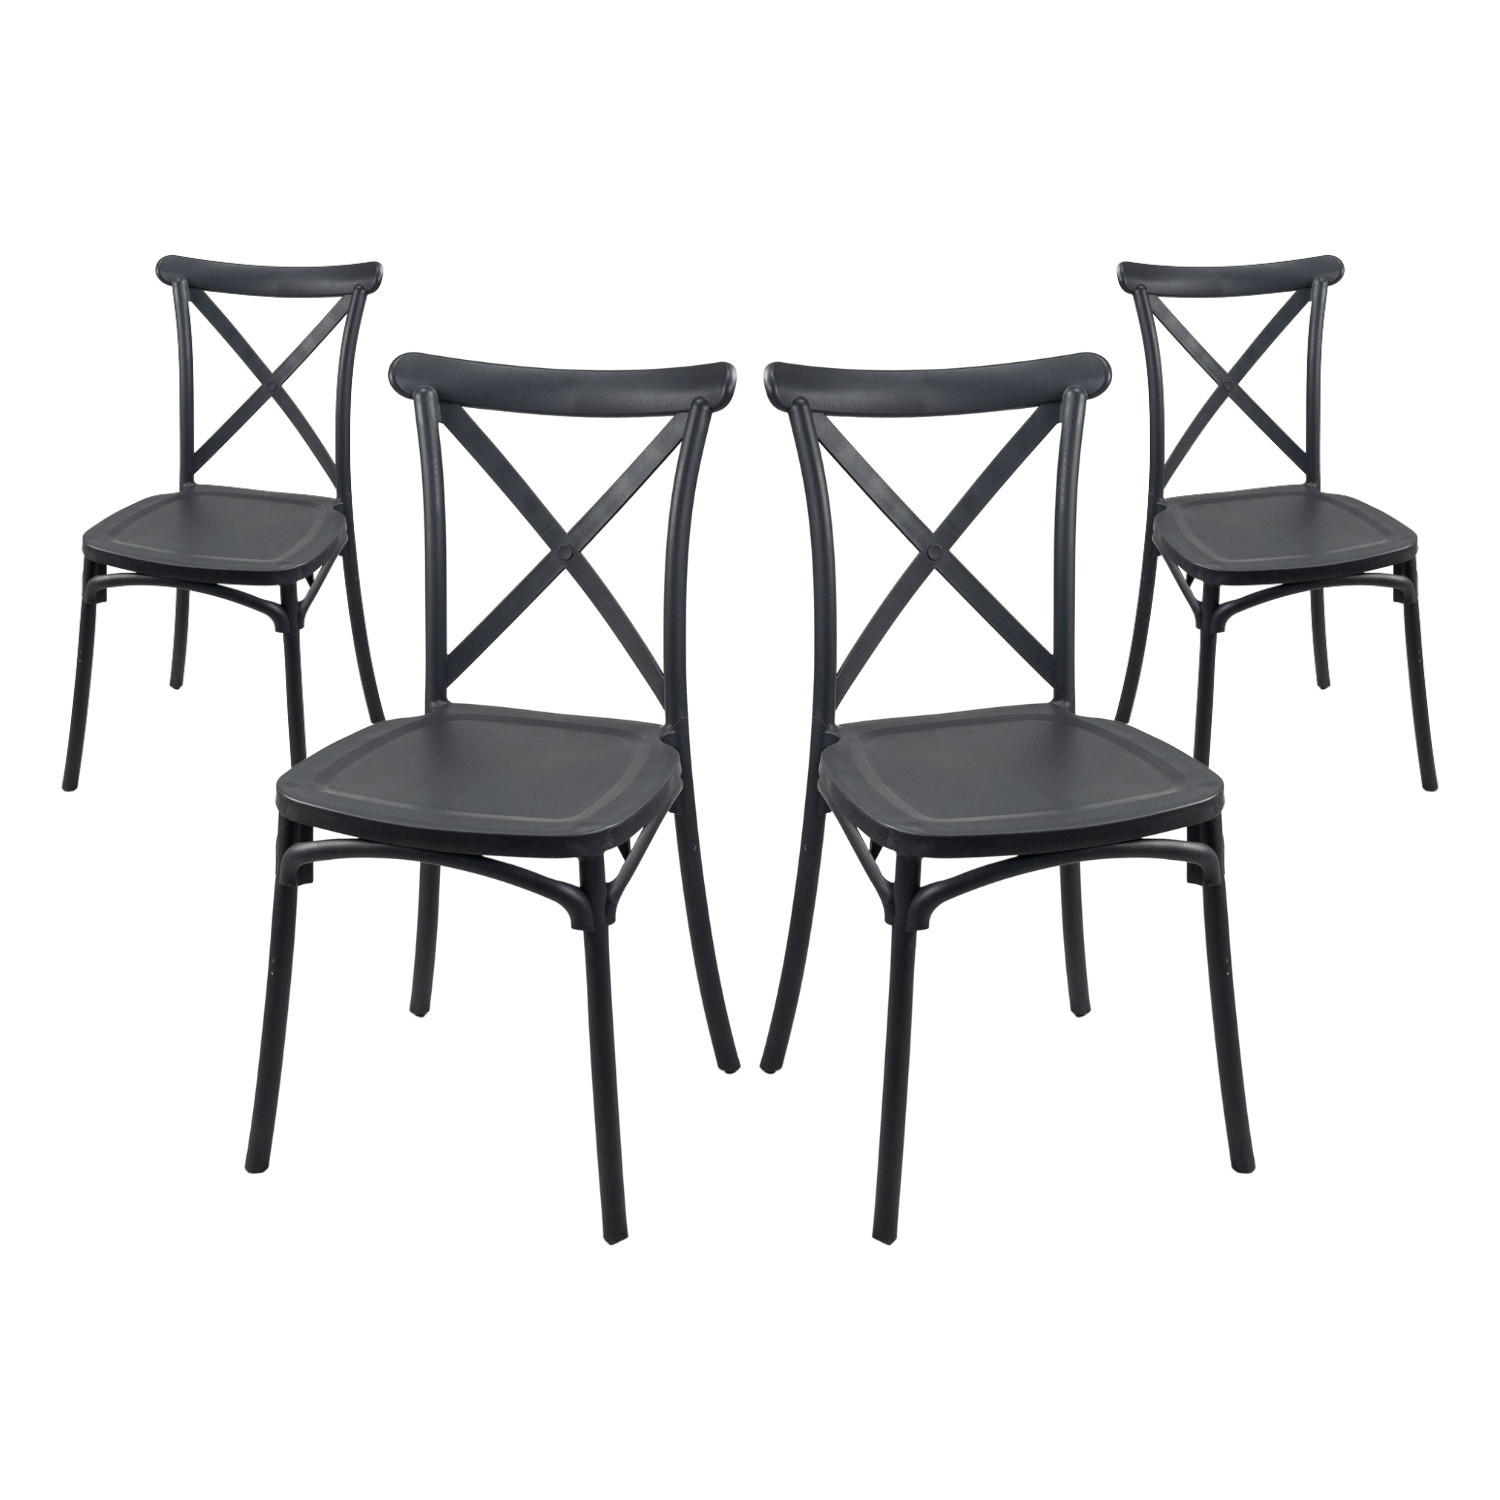 Pack 4 Sillas para Catering Apilables Charlotte 50x44x87.5cm 7house Sillas y Sillones de Exterior 1